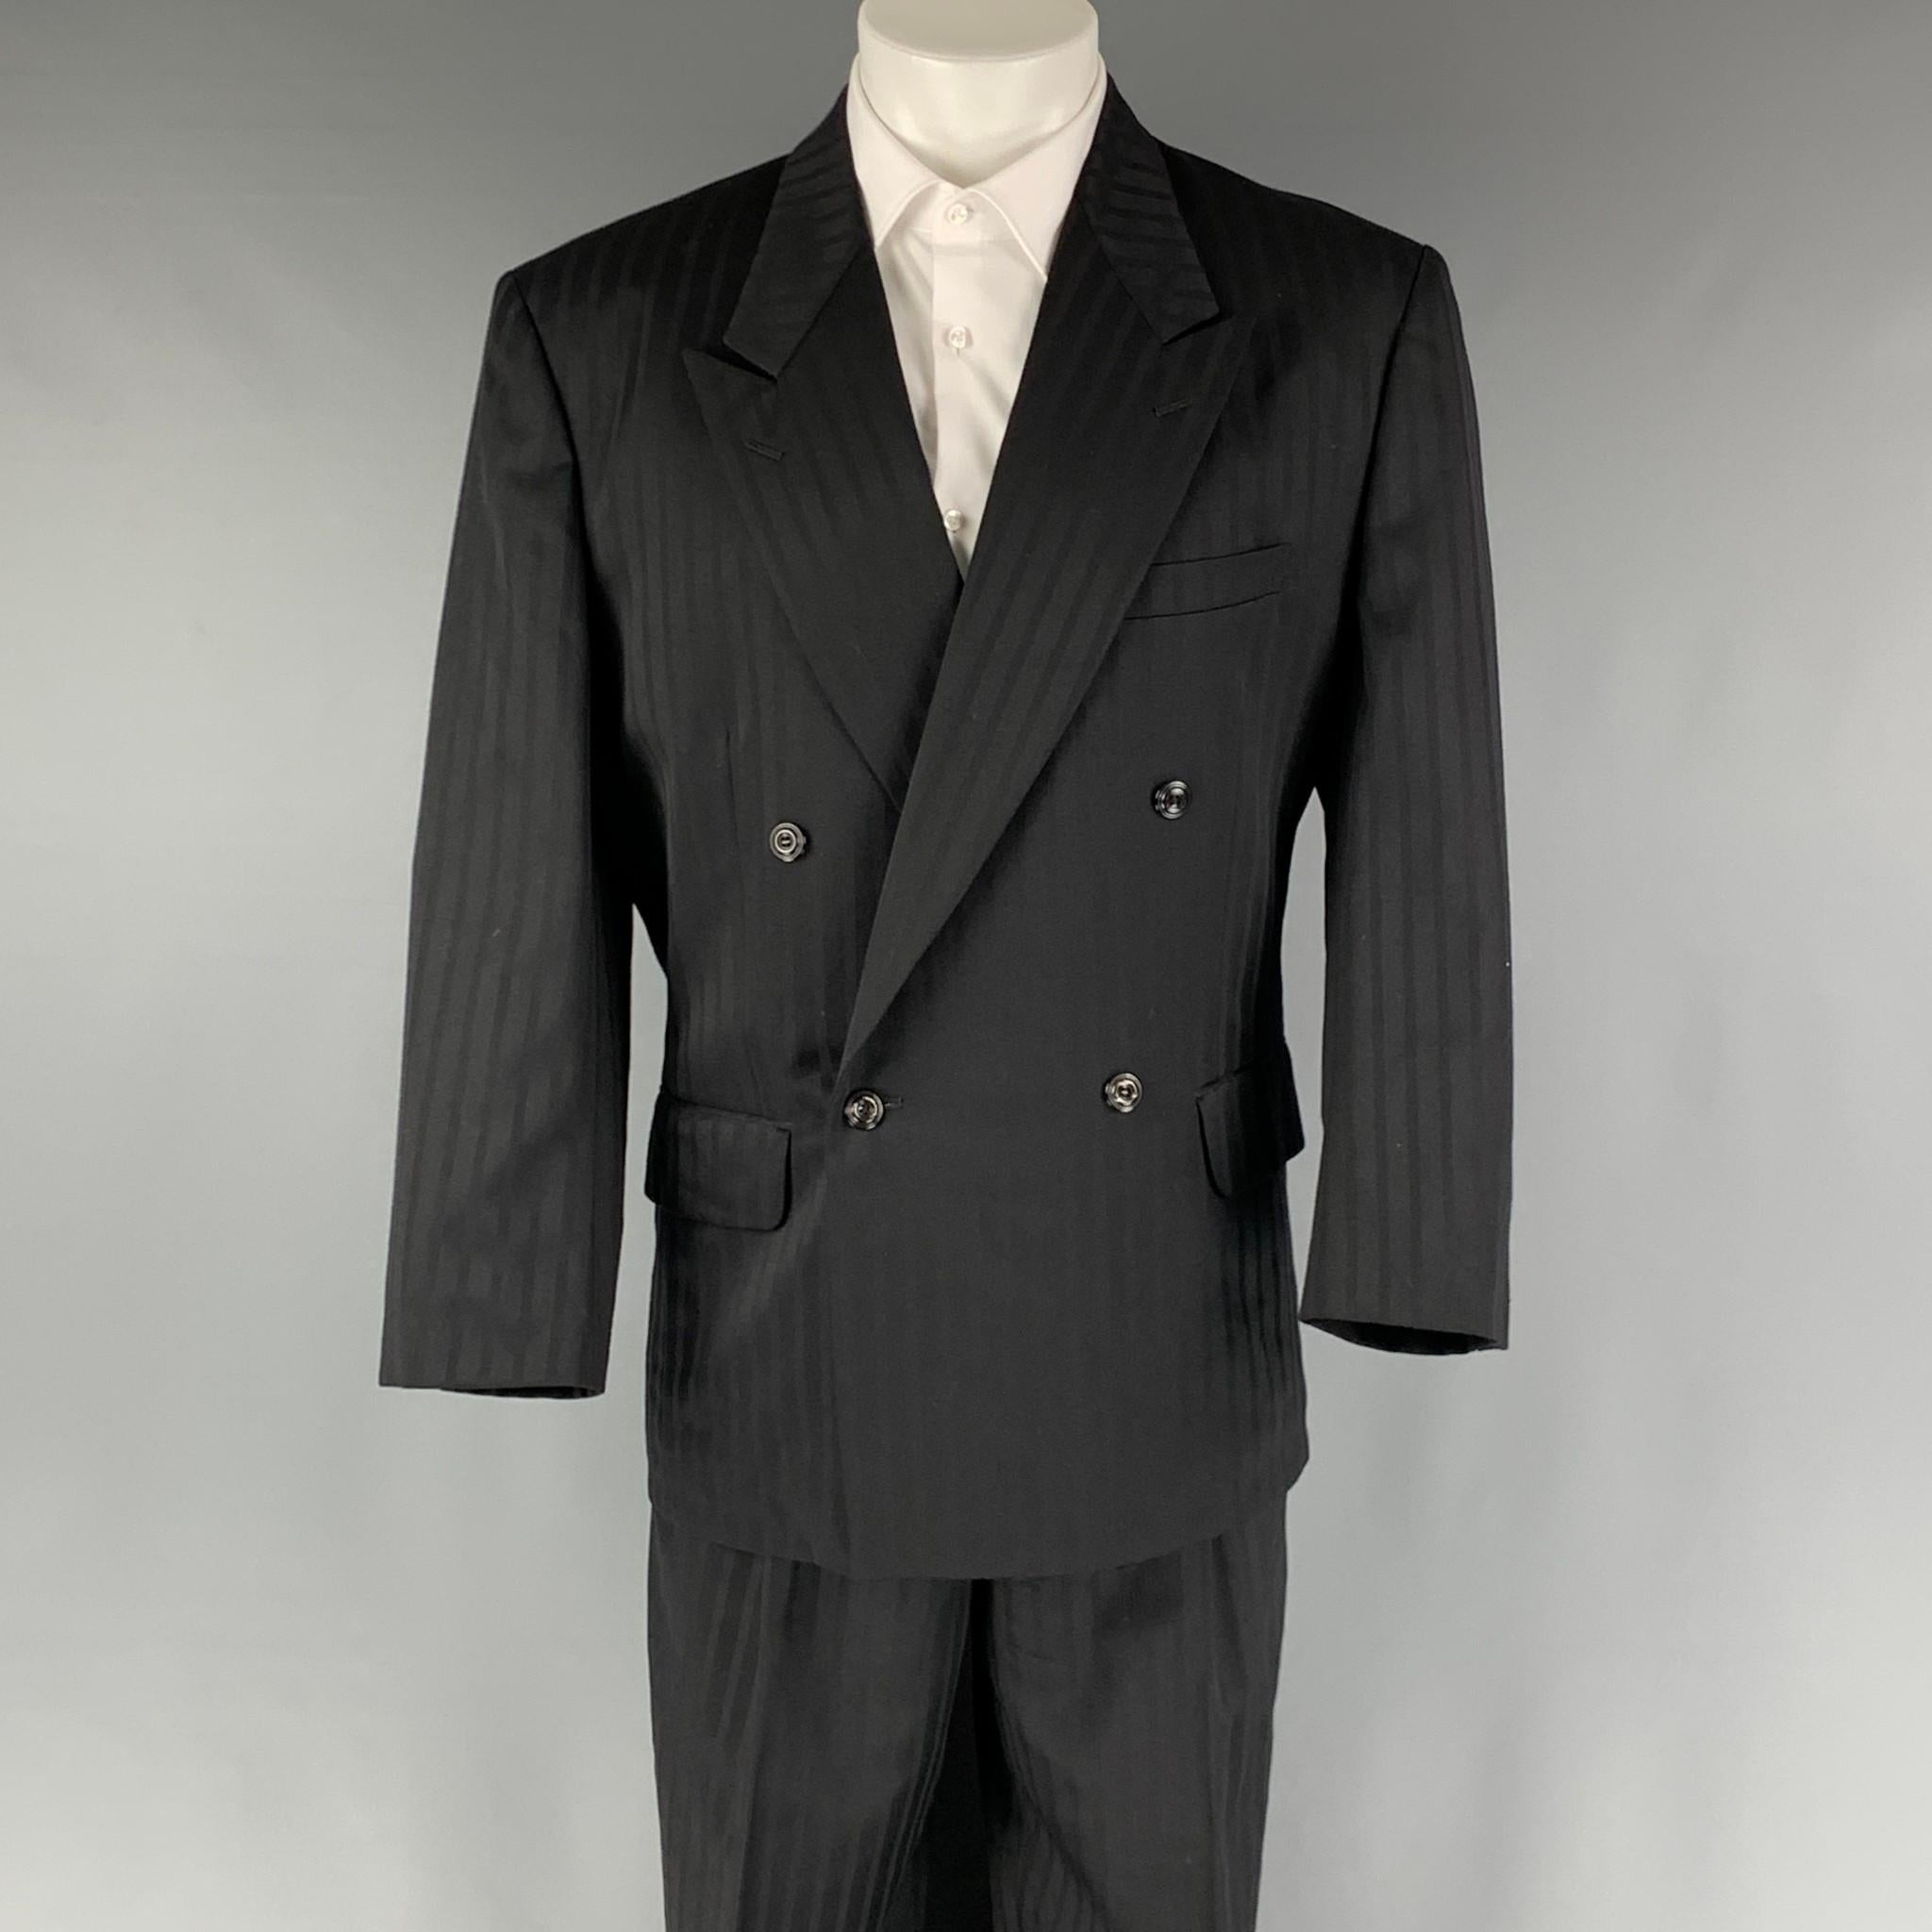 MATSUDA VINTAGE suit comes in black striped wool woven material with a full liner and includes a double breasted closure with a peak lapel and matching high waist pants. Made in Japan.

Excellent Pre-Owned Condition.
Marked: